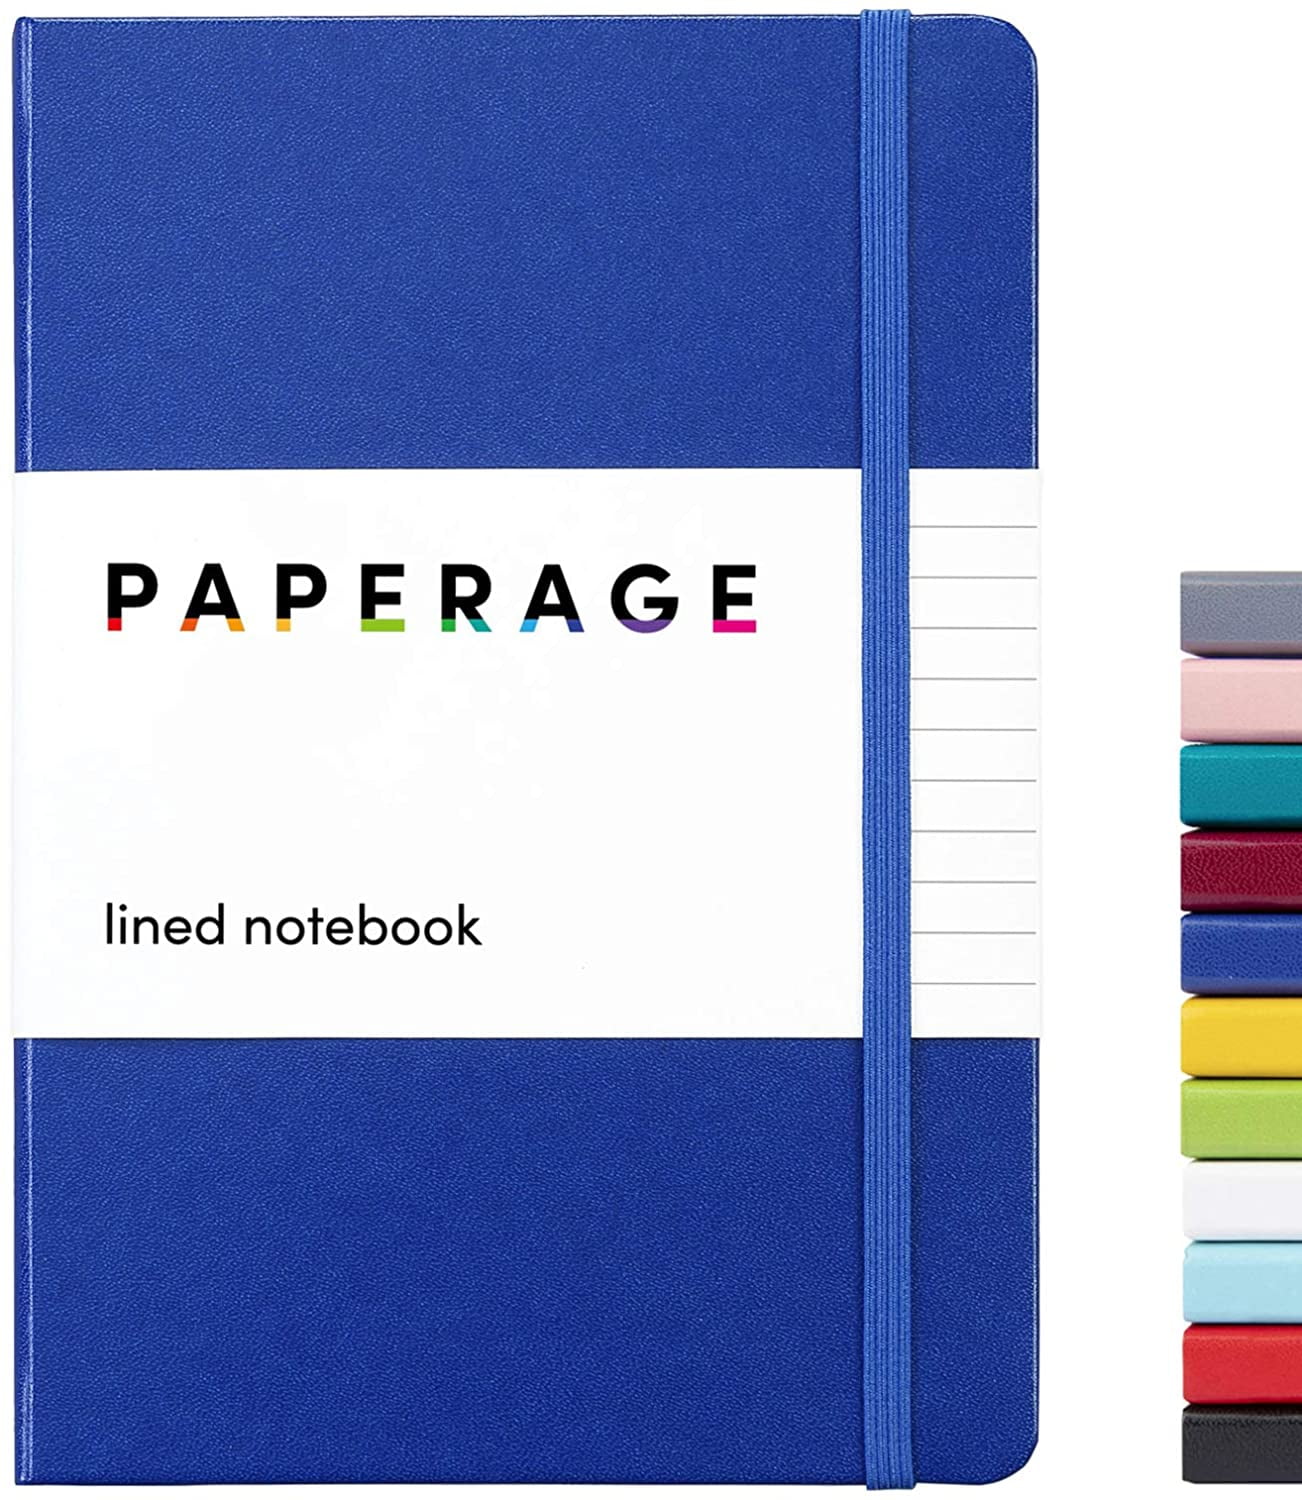 160 Pages Thick Paper Ocean Blue Marble Huamxe Lined Journal Notebook Medium 5.7 x 8.4 in Cute Aesthetic A5 College Ruled Notebook for Journaling Writing Work Office School Women Men Hardcover